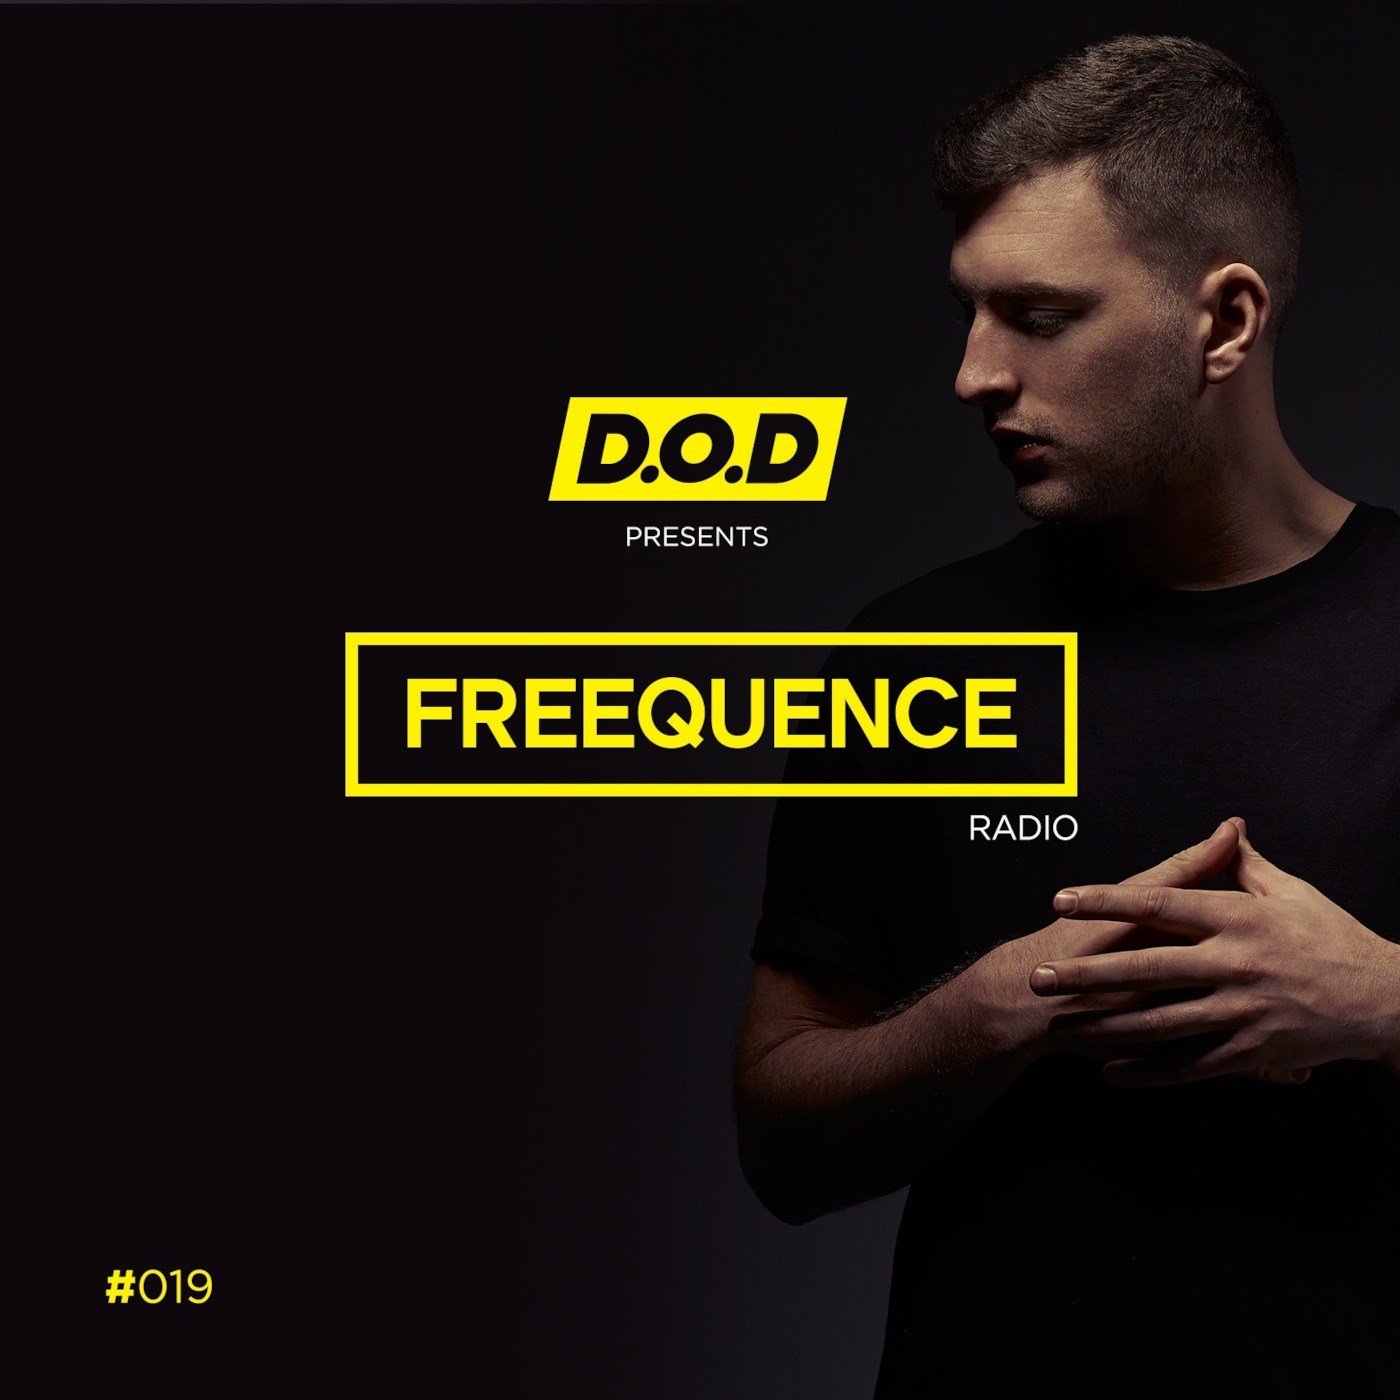 #FREEQUENCE Radio with D.O.D #019